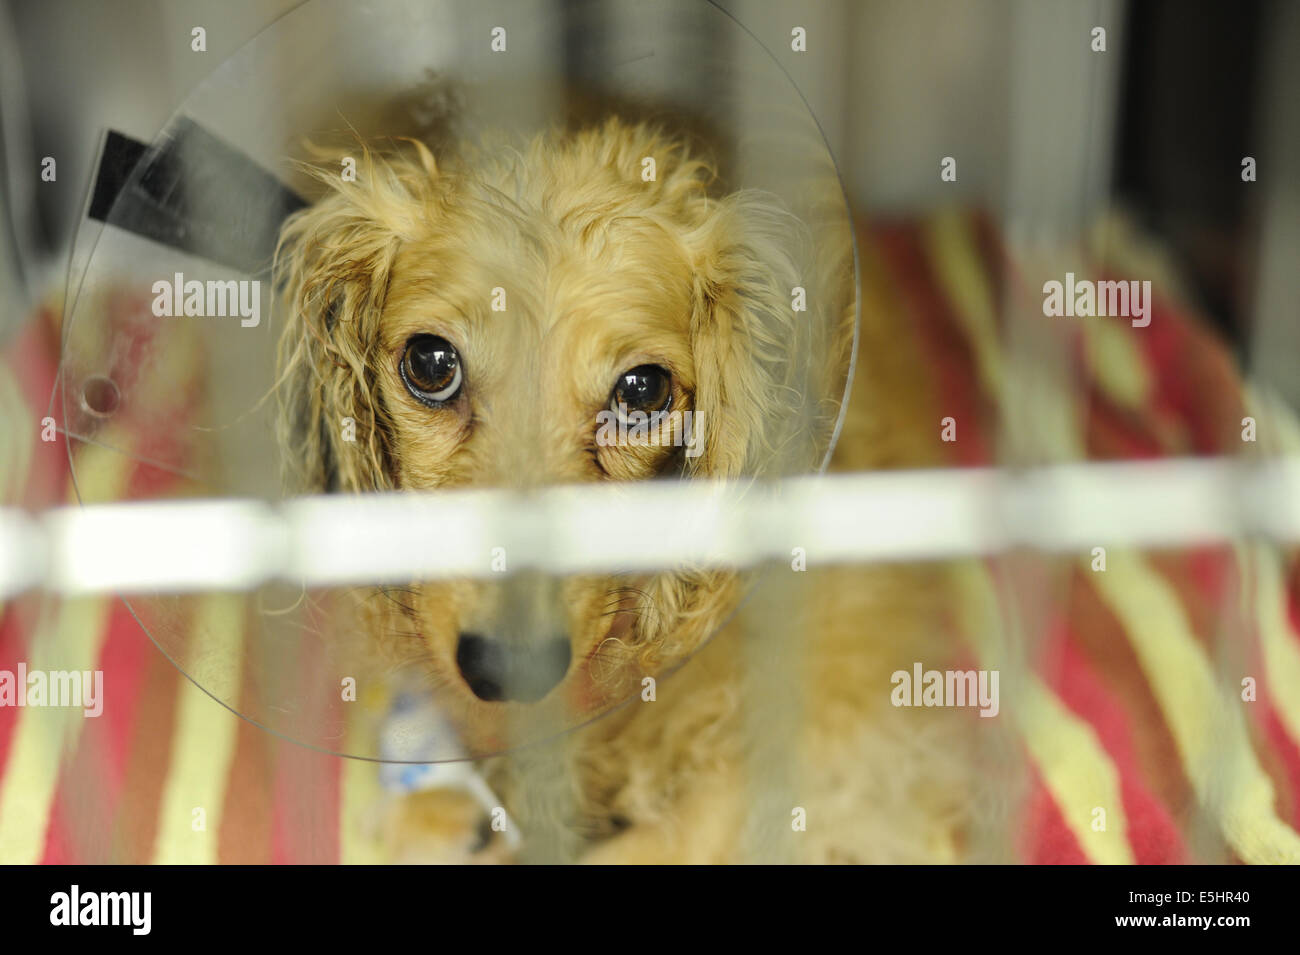 A dog waits in a cage after surgery at the Falls Road Animal Hospital,  Baltimore, Md., June 18, 2014. After surgery dogs lay do Stock Photo - Alamy